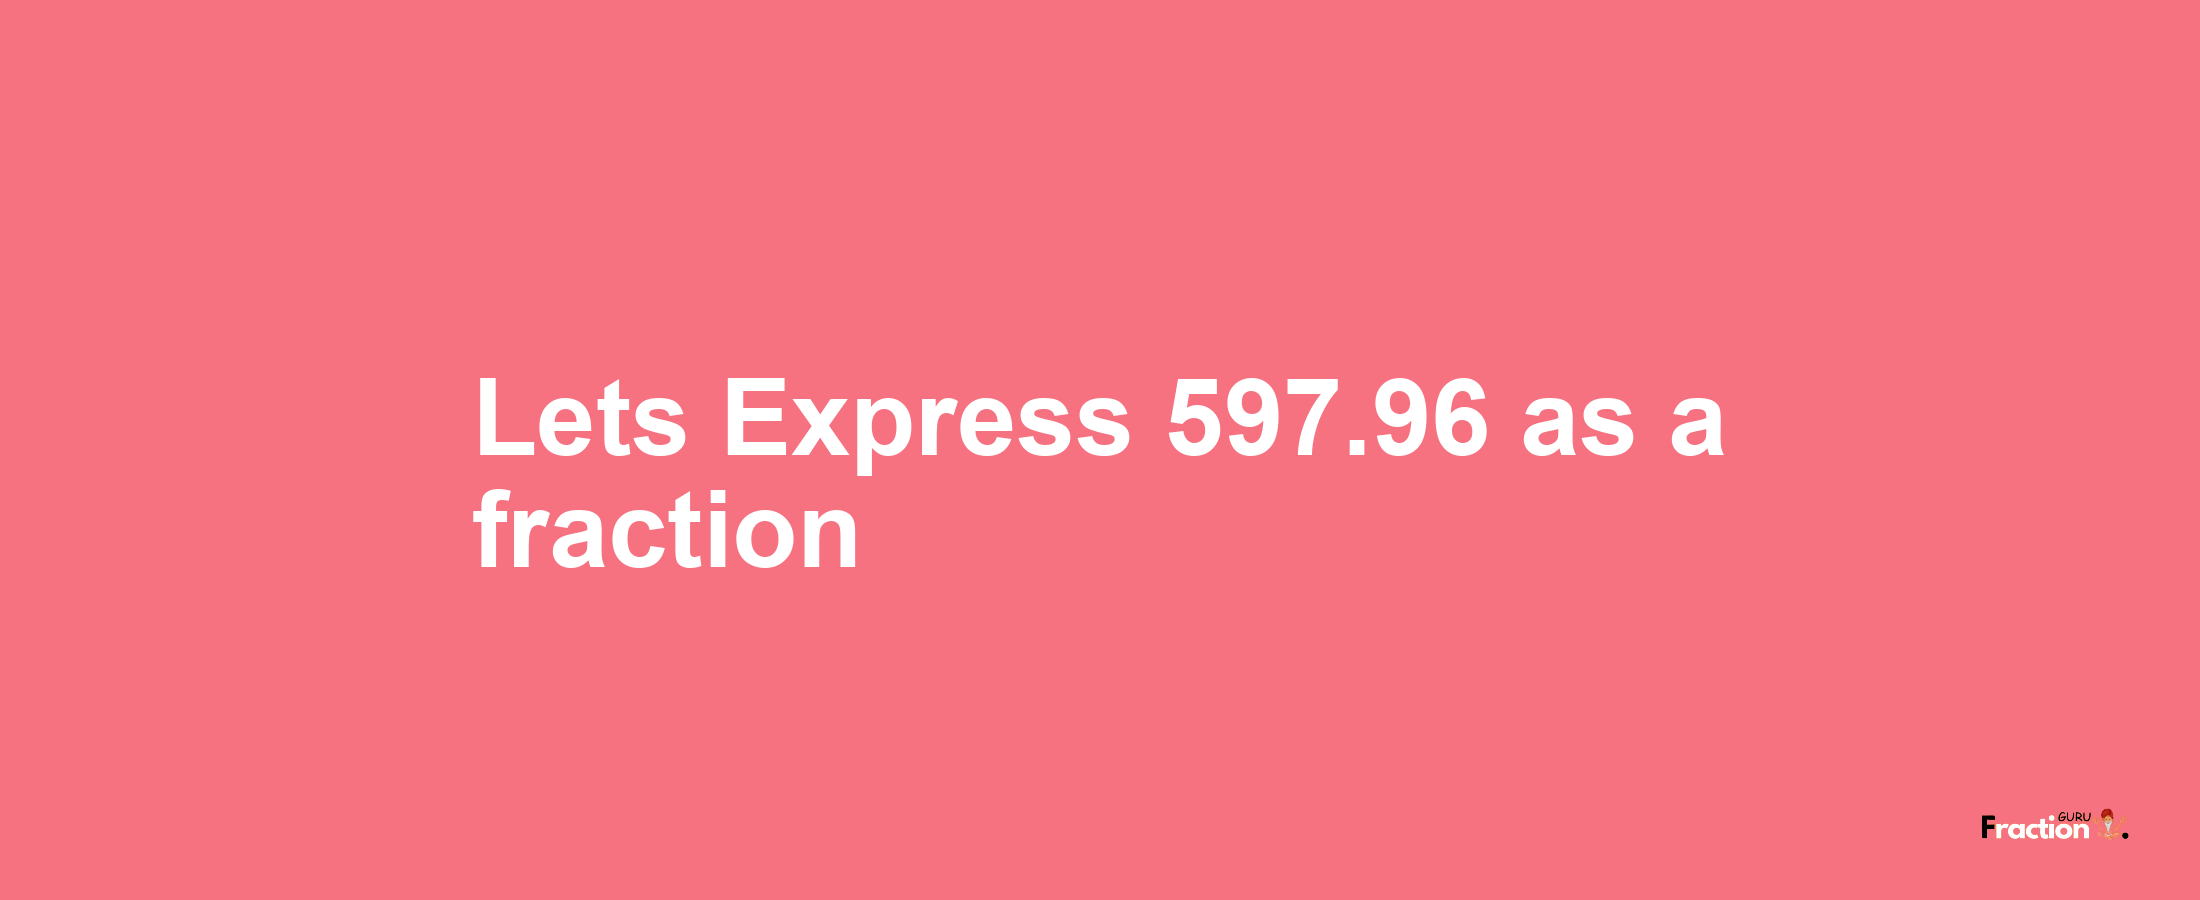 Lets Express 597.96 as afraction